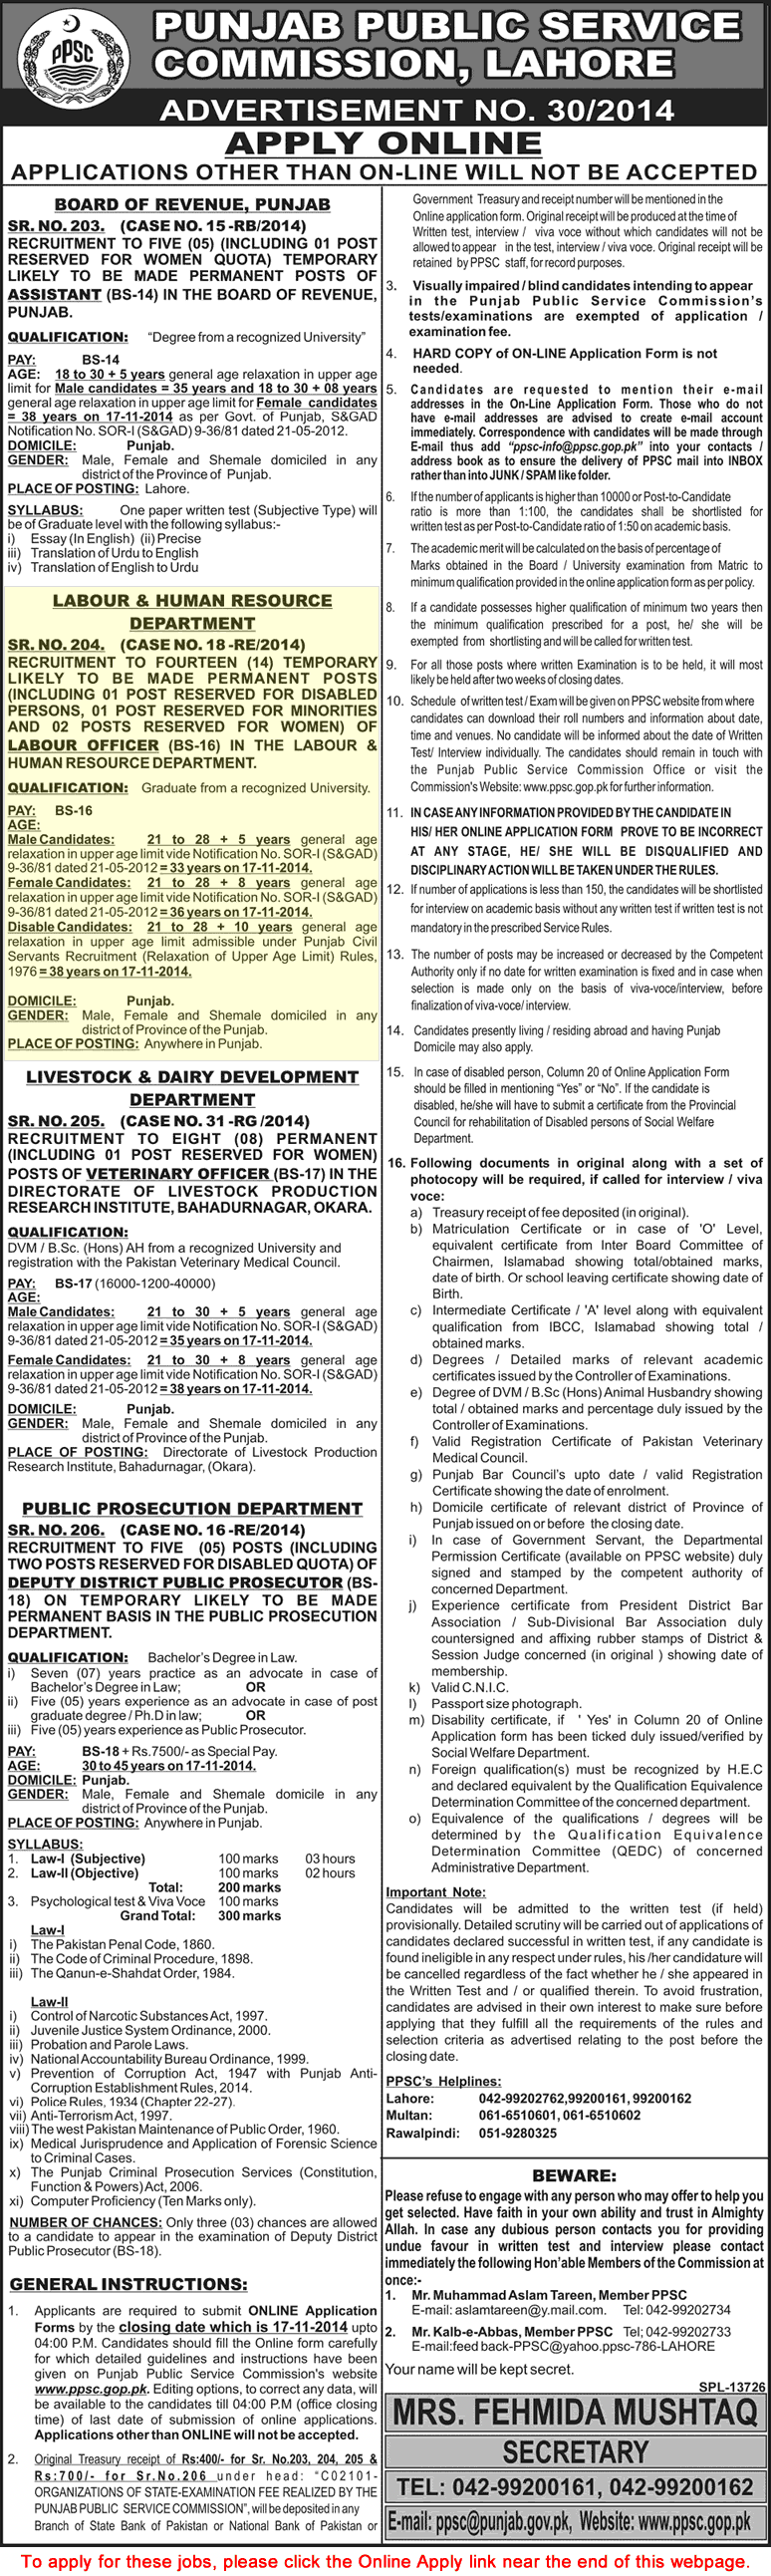 PPSC Labour & Human Resource Department Punjab Jobs 2014 October for Labour Officers